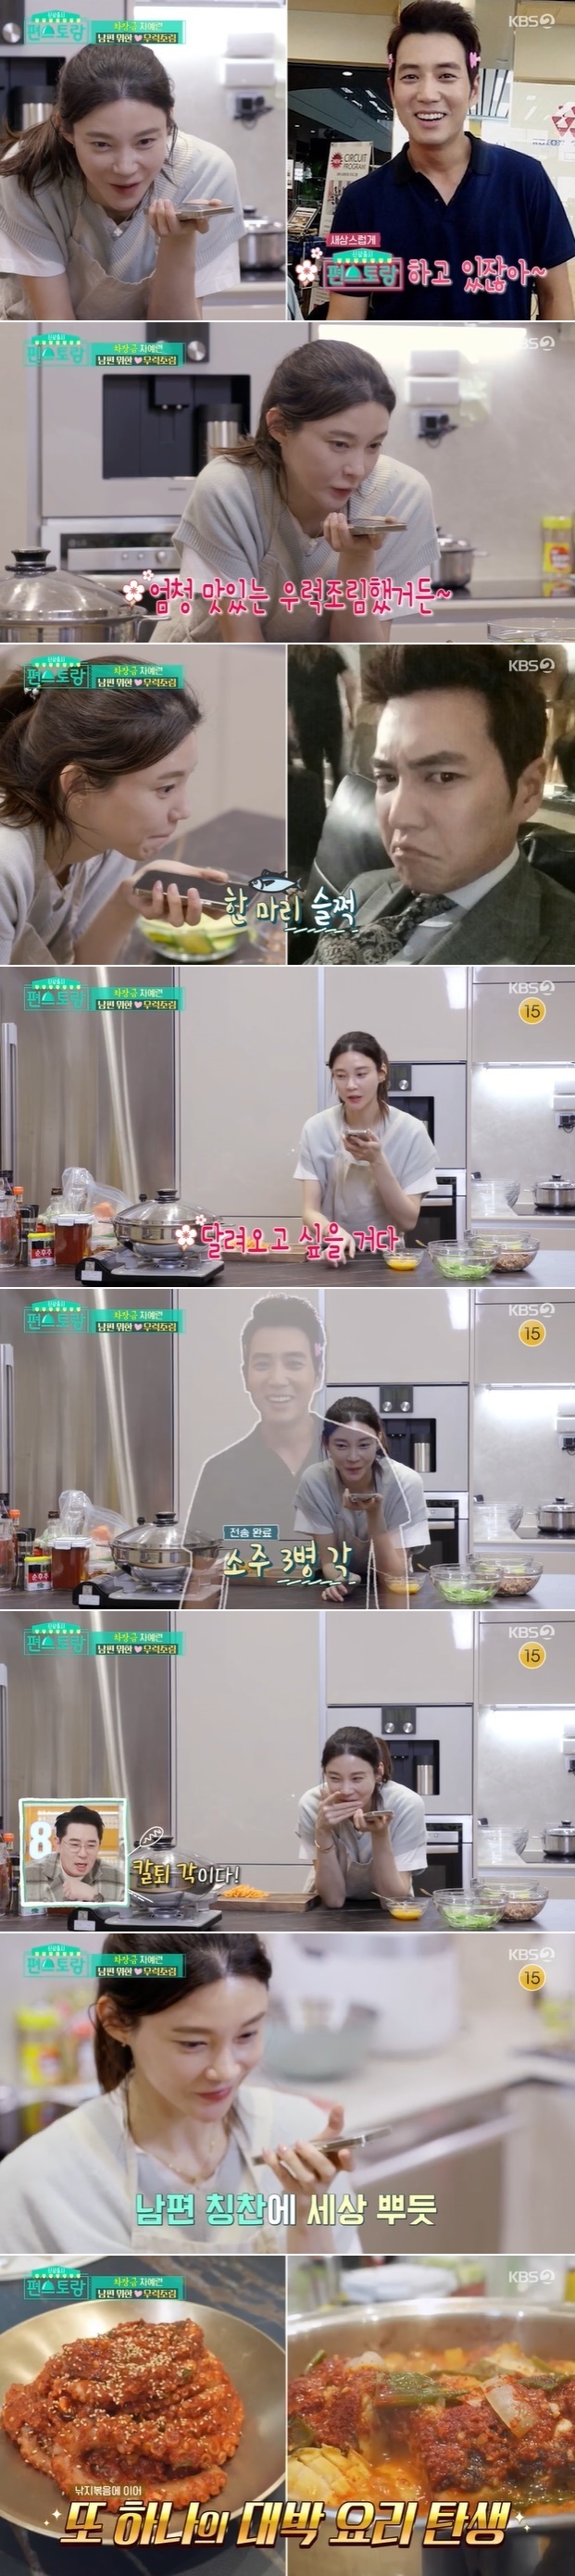 The conversation like the Newlyweds of the Ju Sang BookCha Ye-ryun couple in their sixth year of marriage envied.On April 1, KBS 2TV Stars Top Recipe at Fun-Staurant was released as soon as it first appeared through the last broadcast, a new chef, Cha Ye-ryuns recipe for cooking, which became a On the day of the broadcast, Cha Ye-ryun was surprised that the 4-ja-sized uruku, which was taken out of the refrigerator, was a natural product caught by her husband Ju Sang Wook.It was taken by my brother (Ju Sang Wook) himself, Cha Ye-ryun said, boasting about her husbands fishing skills.Ju Sang Wook is known for his famous fishing enthusiast in the entertainment industry; Cha Ye-ryun, too, has fallen into the charm of fishing along her husband Ju Sang Wook.Cha Ye-ryun made a red-spiced, flavoured urchin with a urchin caught by Ju Sang Wook; he also handed down the honeytip The best radishes for removing fish scales.I removed the scales and put the remaining radish in the afforestation, he said.Cha Ye-ryun, who sends Ju Sang Wook a picture of the turbid forestry and says come home quickly, was no different from any other housewife.Ju Sang Wook, who saw the picture of the rice cake, praised Cha Ye-ryuns dish, saying, Its really delicious, its not a joke.